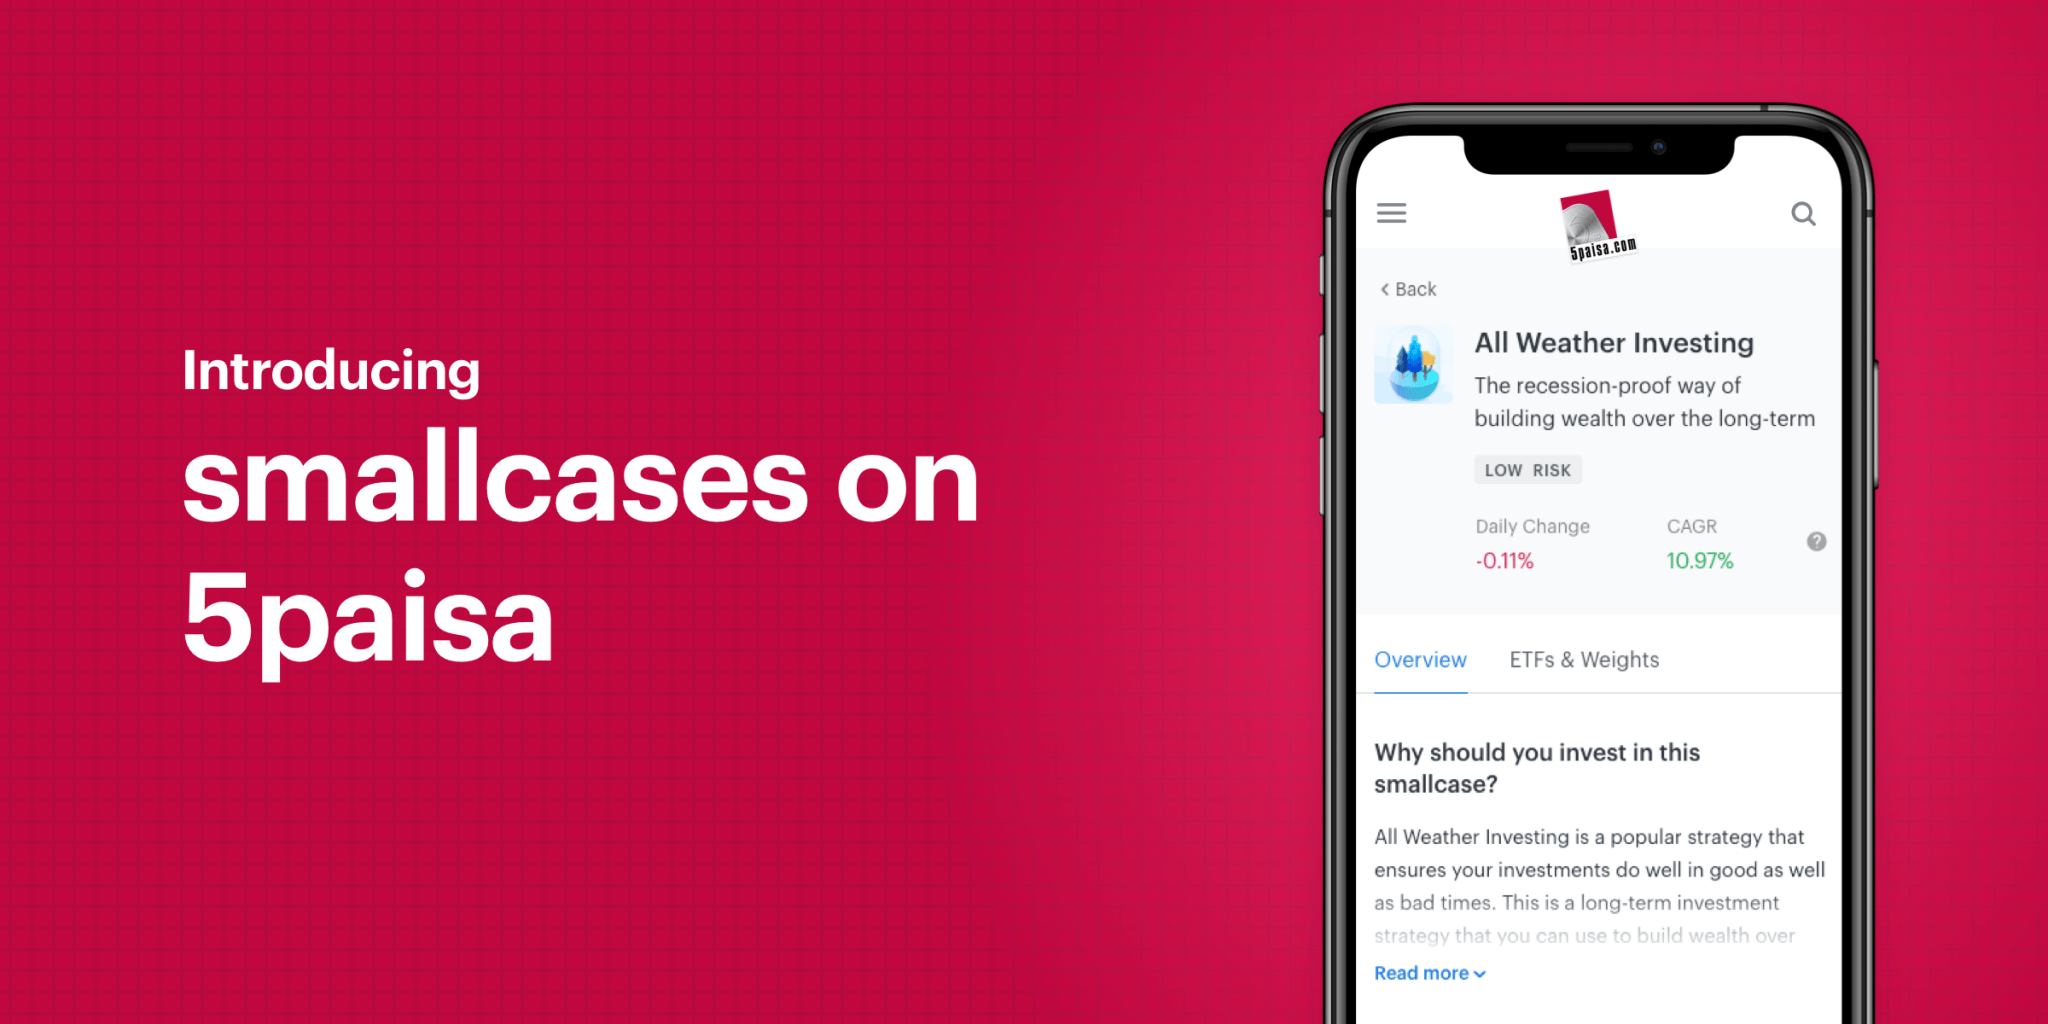 Introducing smallcases on 5Paisa